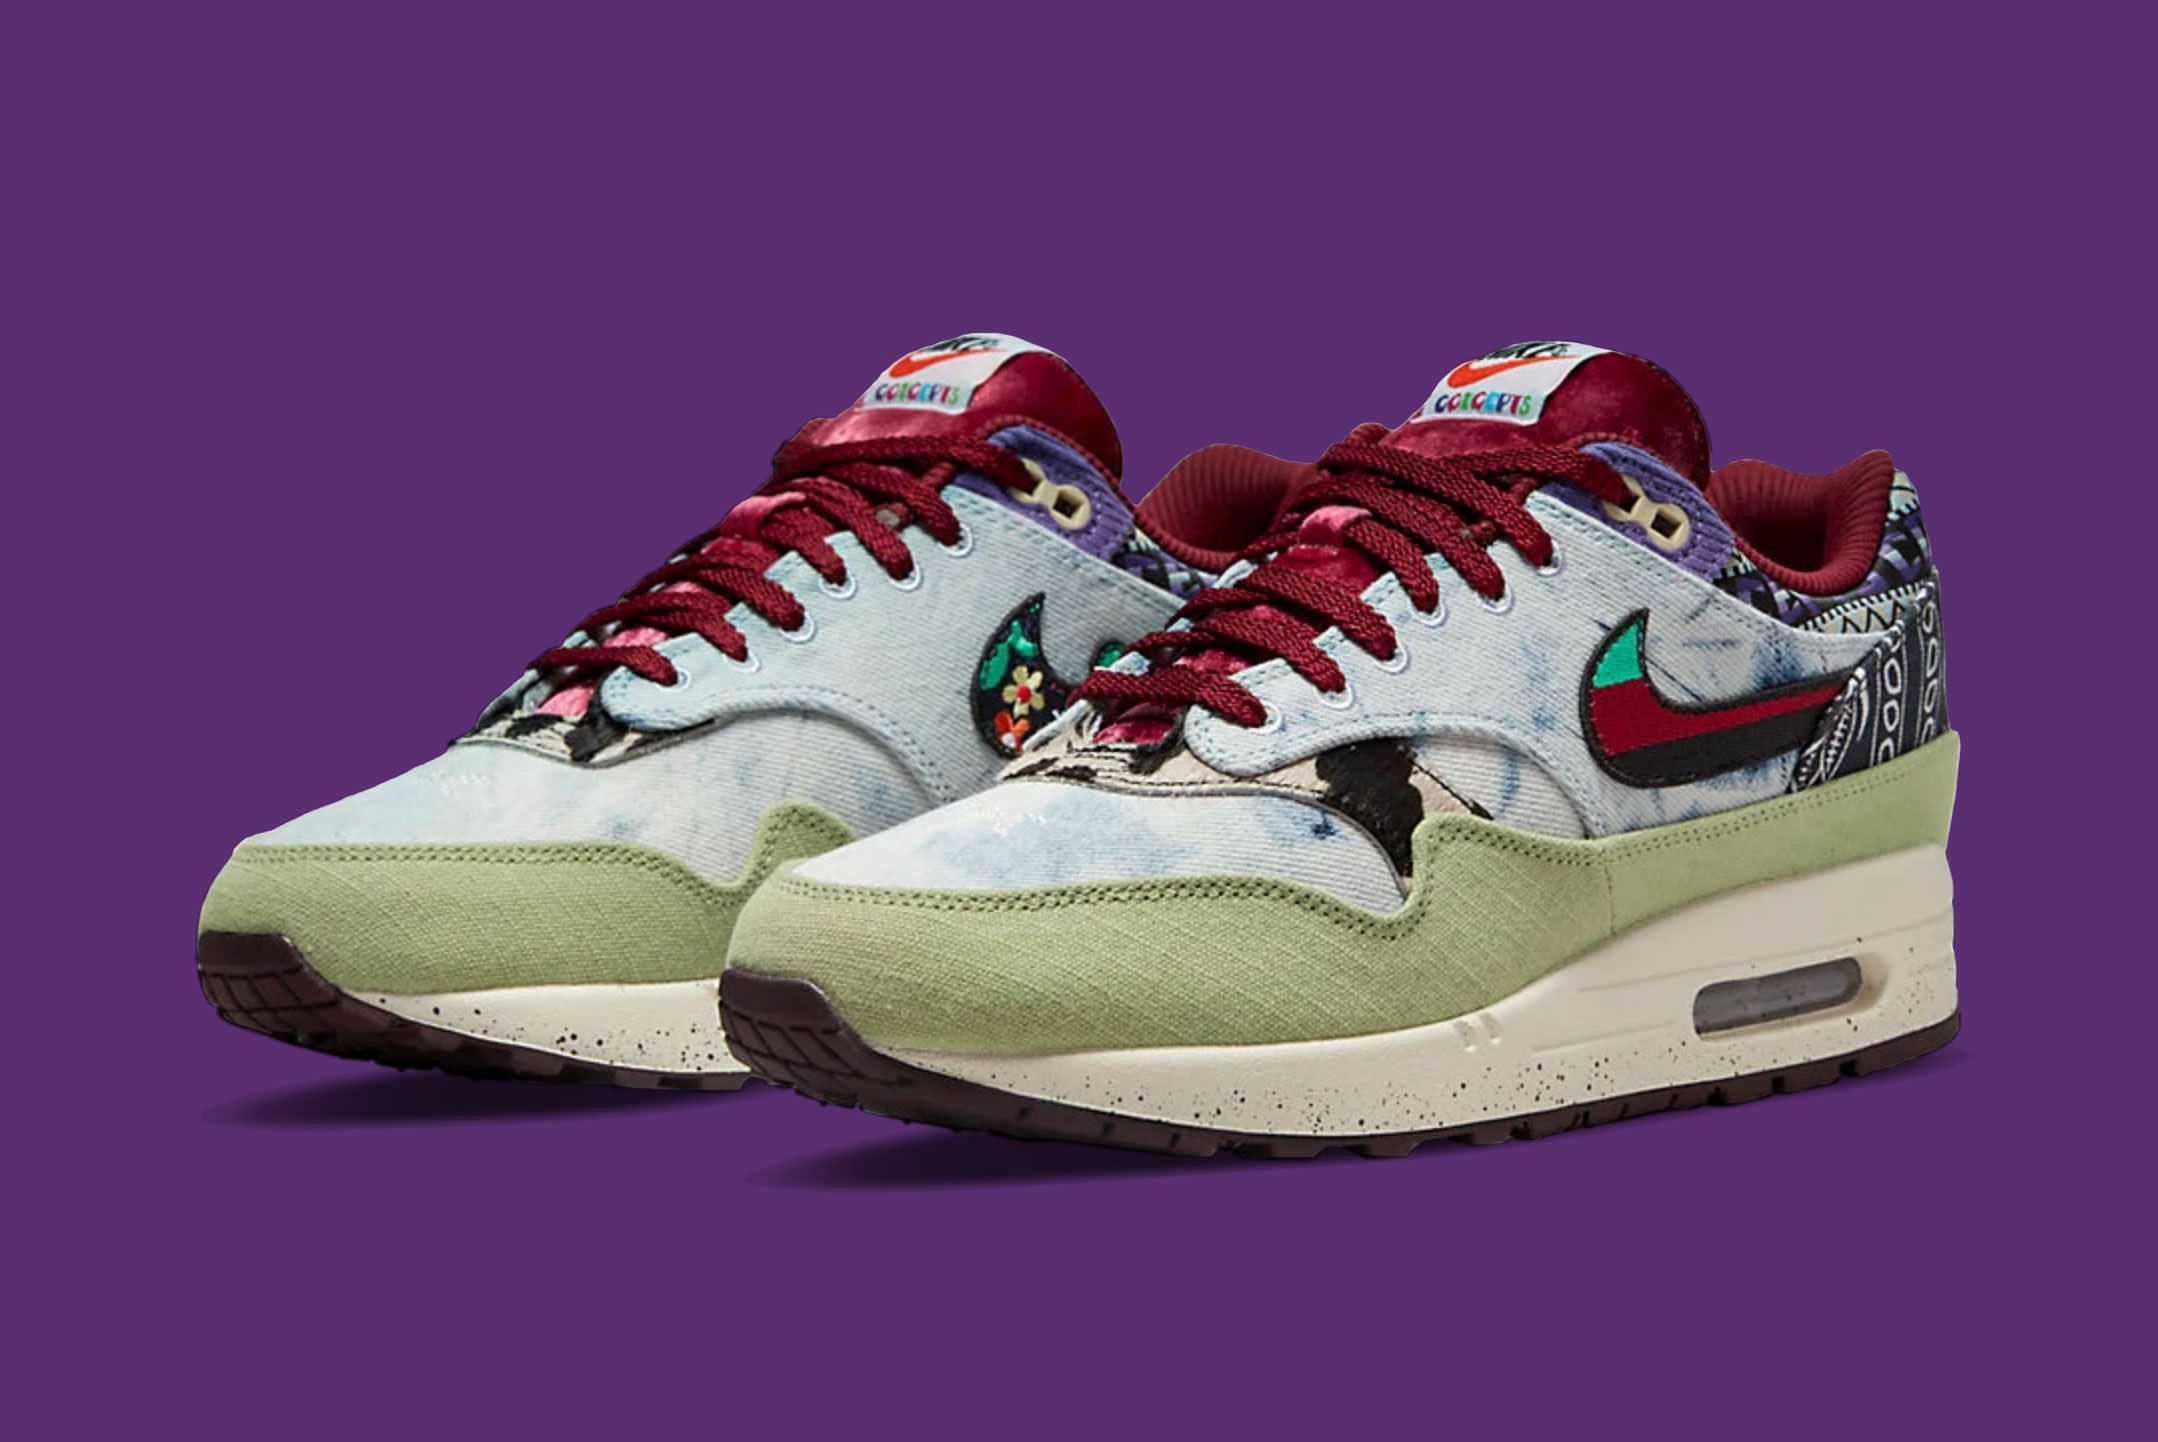 Where to Buy the Concepts x Nike Air Max 1 'Mellow', the JJJJound x New